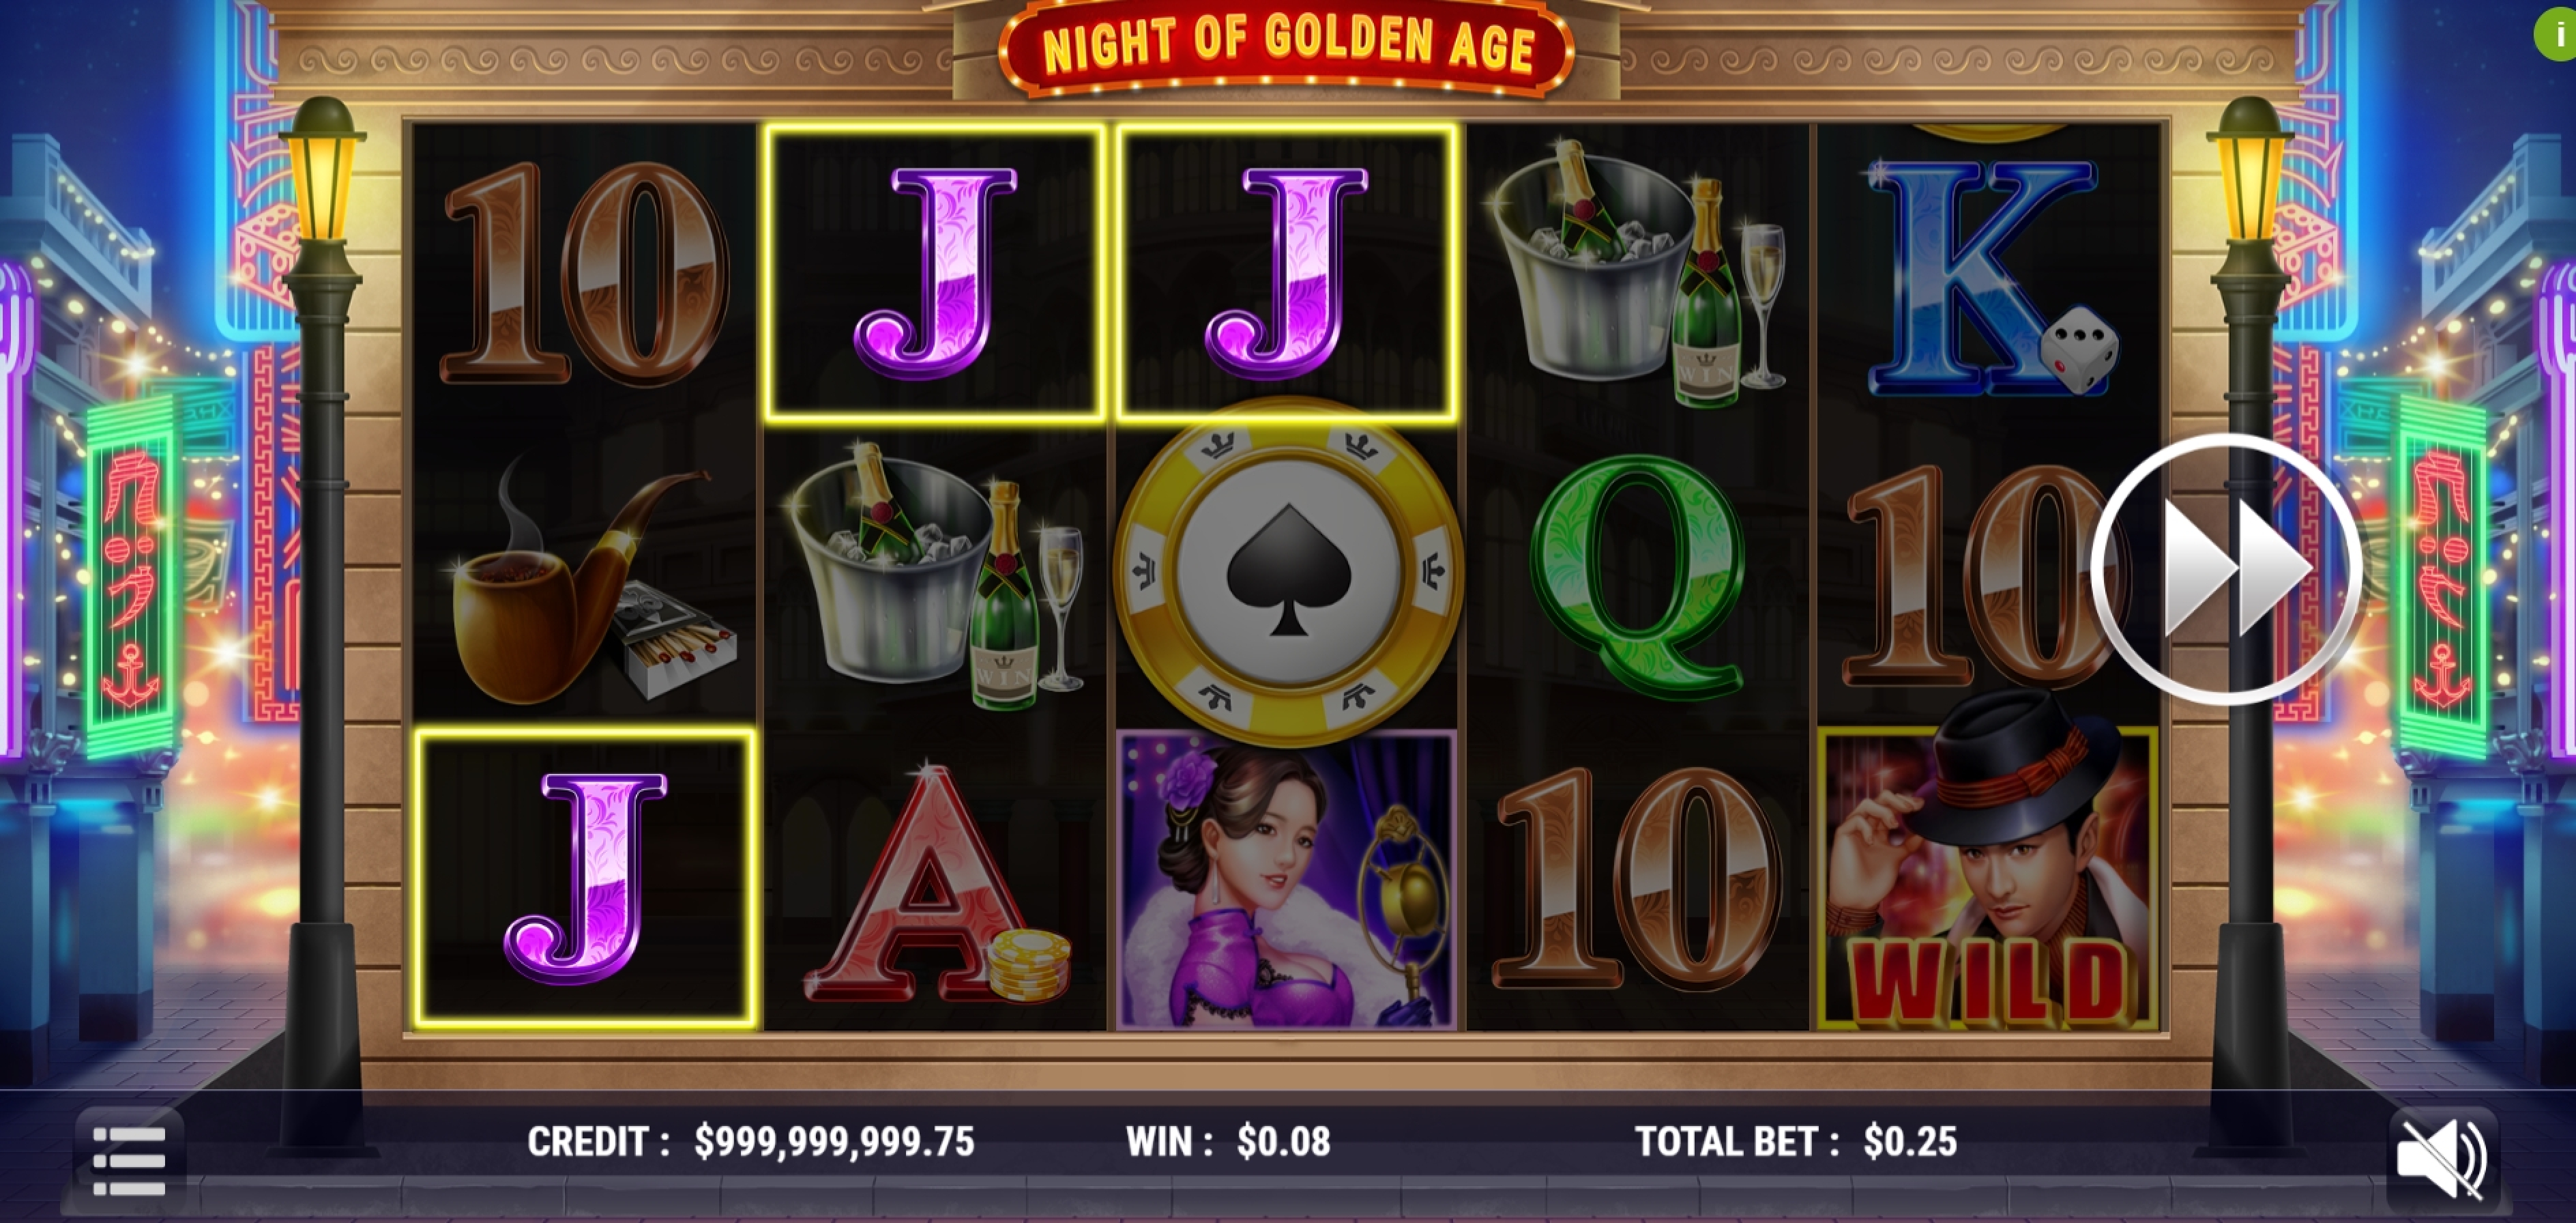 Win Money in Night of Golden Age Free Slot Game by Slot Factory